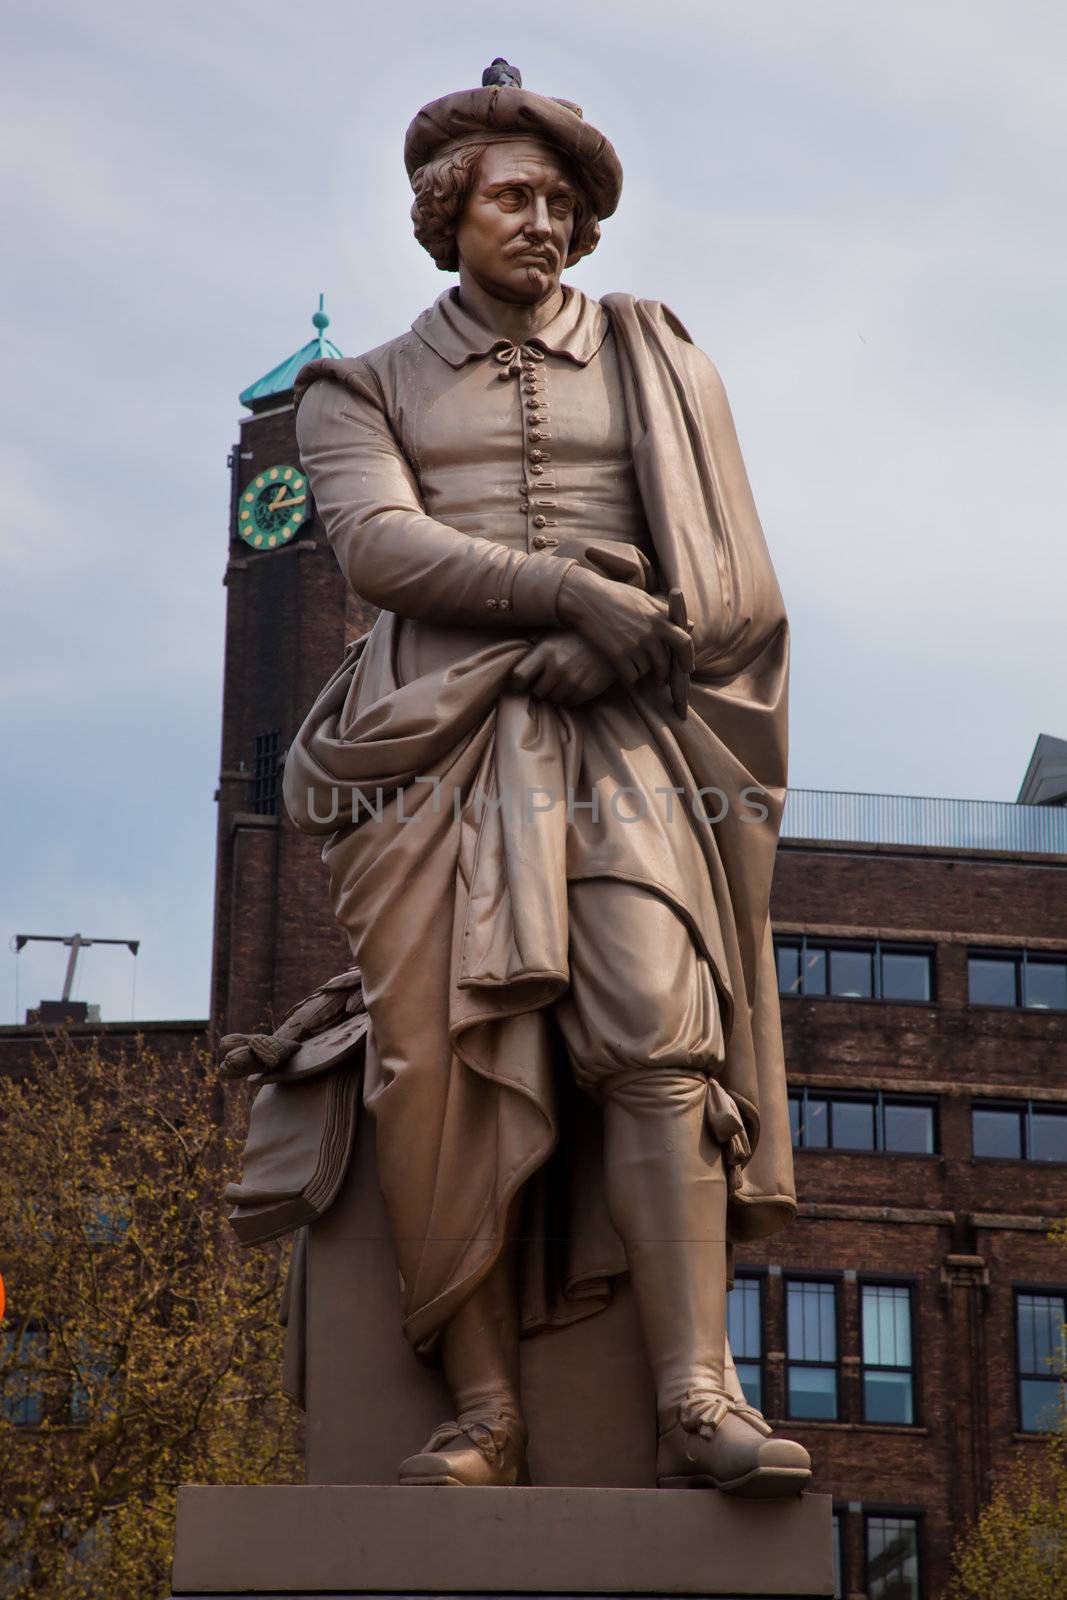 The statue of Rembrandt in Amsterdam by photocreo